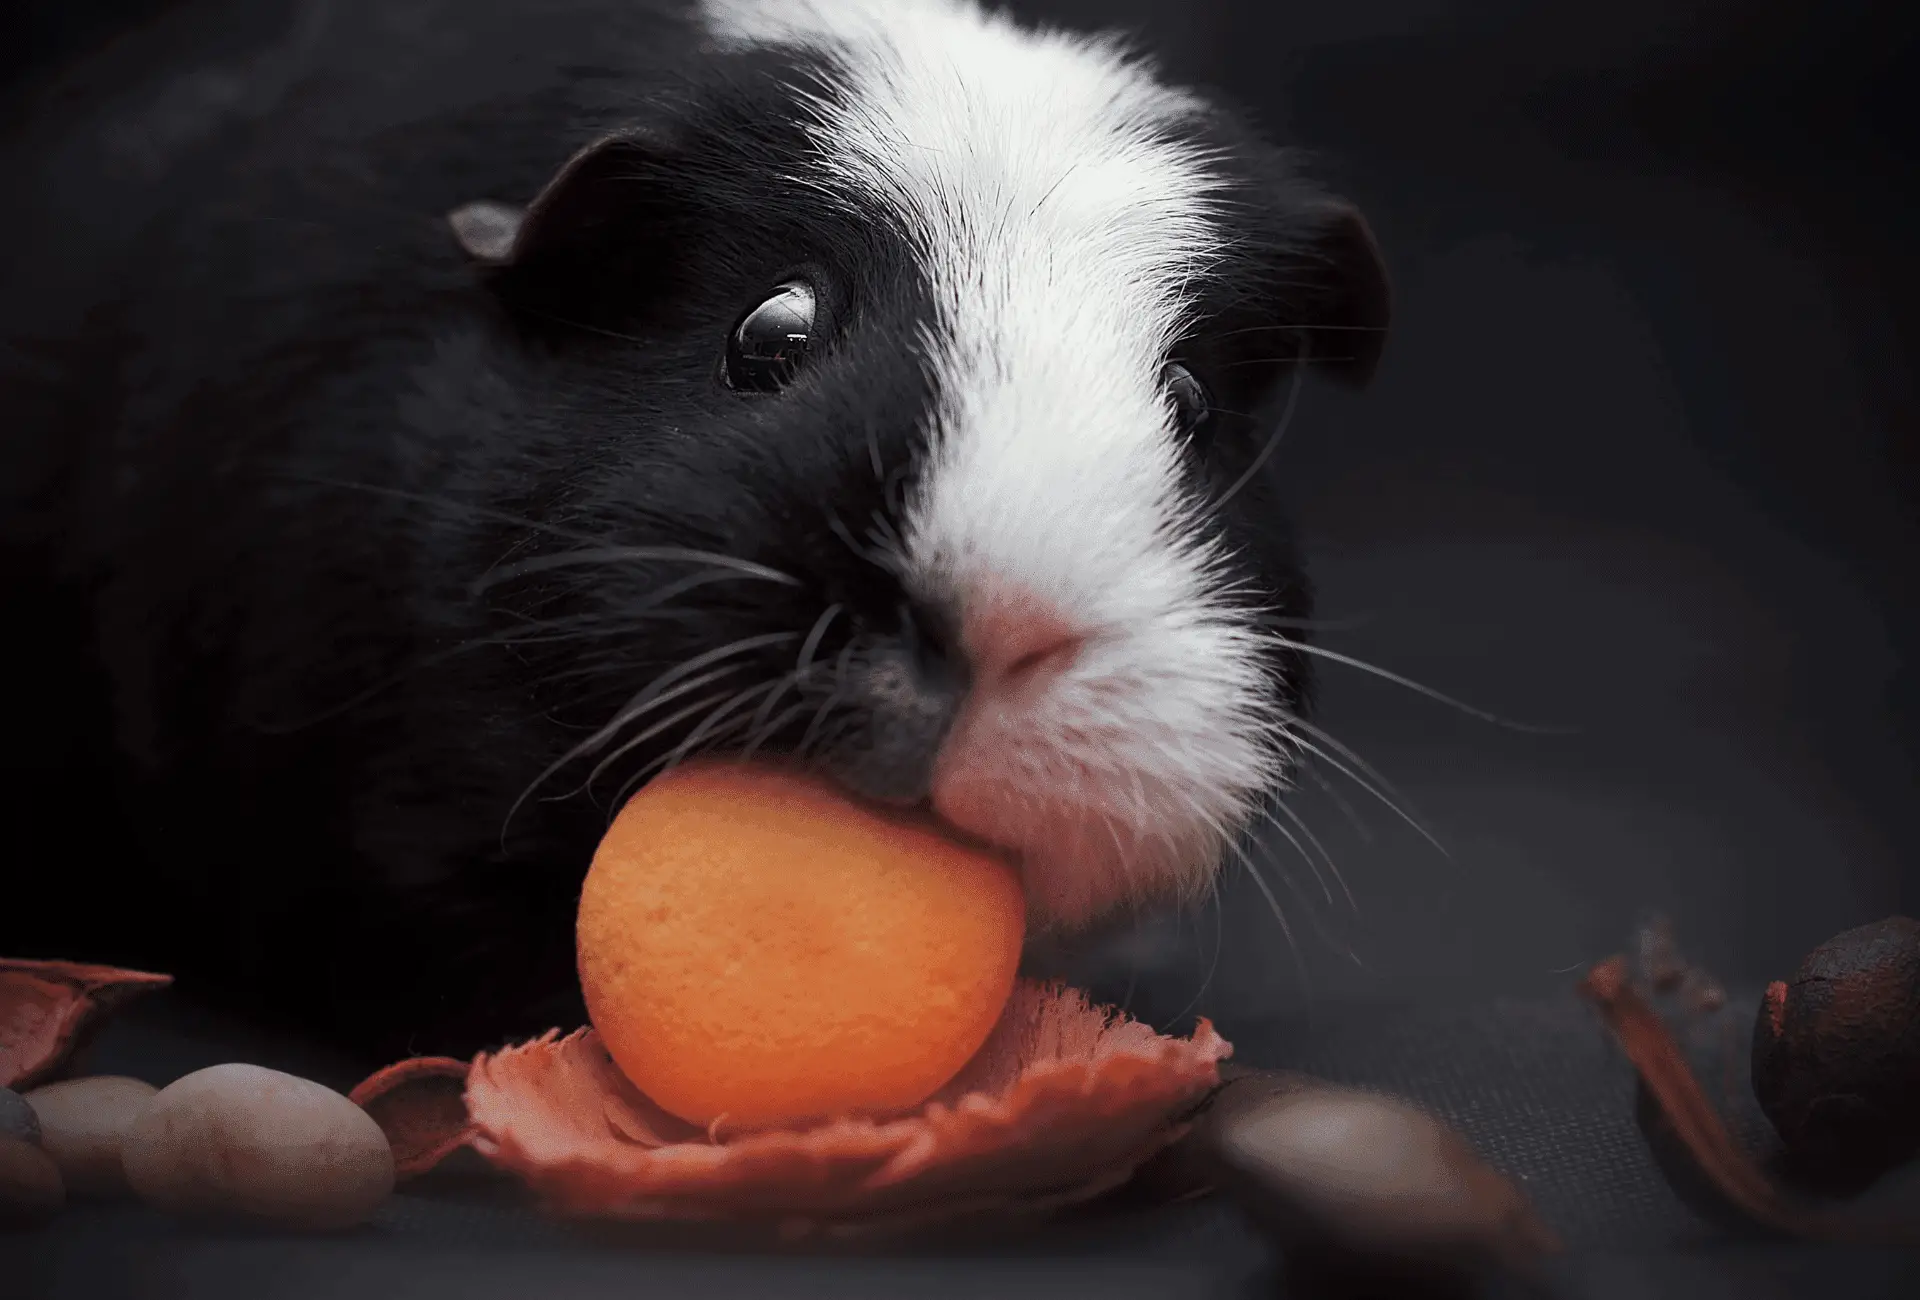 Guinea pig chewing on a toy in the dark.